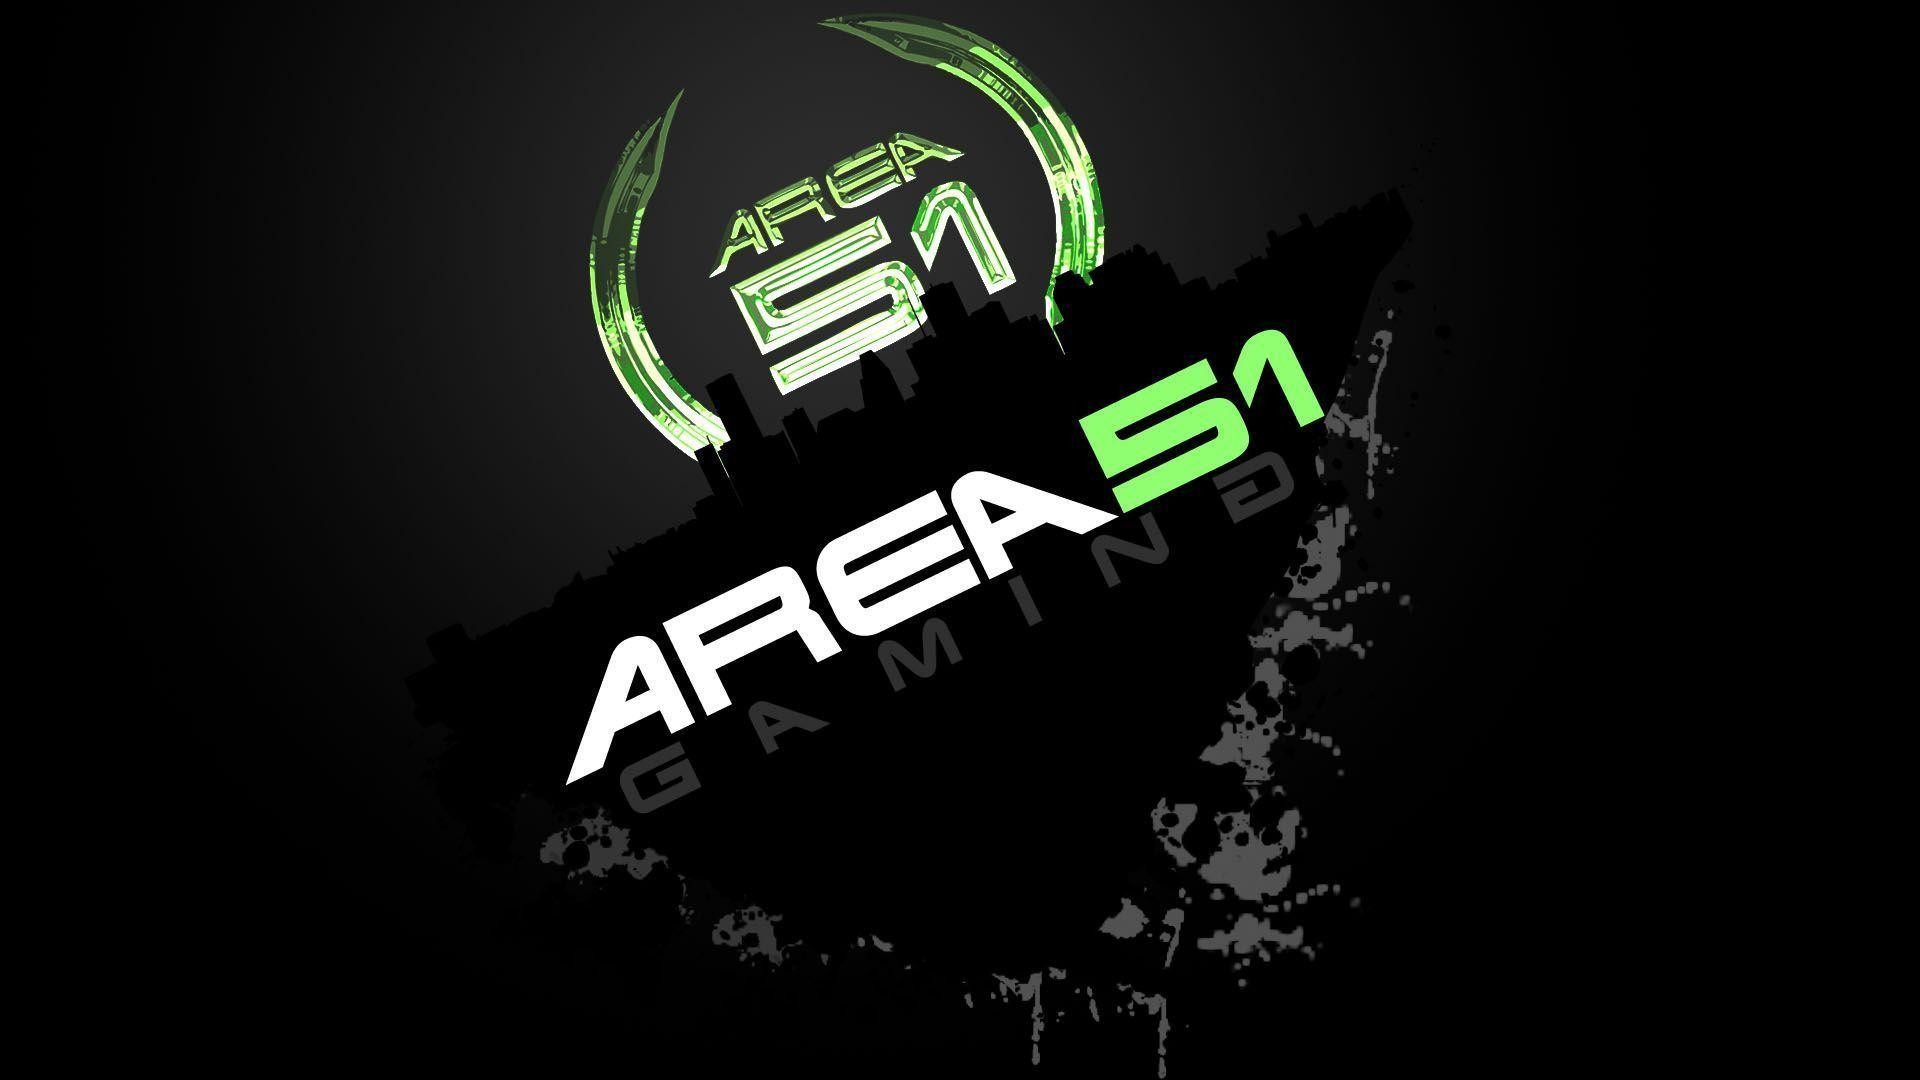 1920x1080 Area51 Gaming - Forums - View topic - Area 51 Gaming Shirts